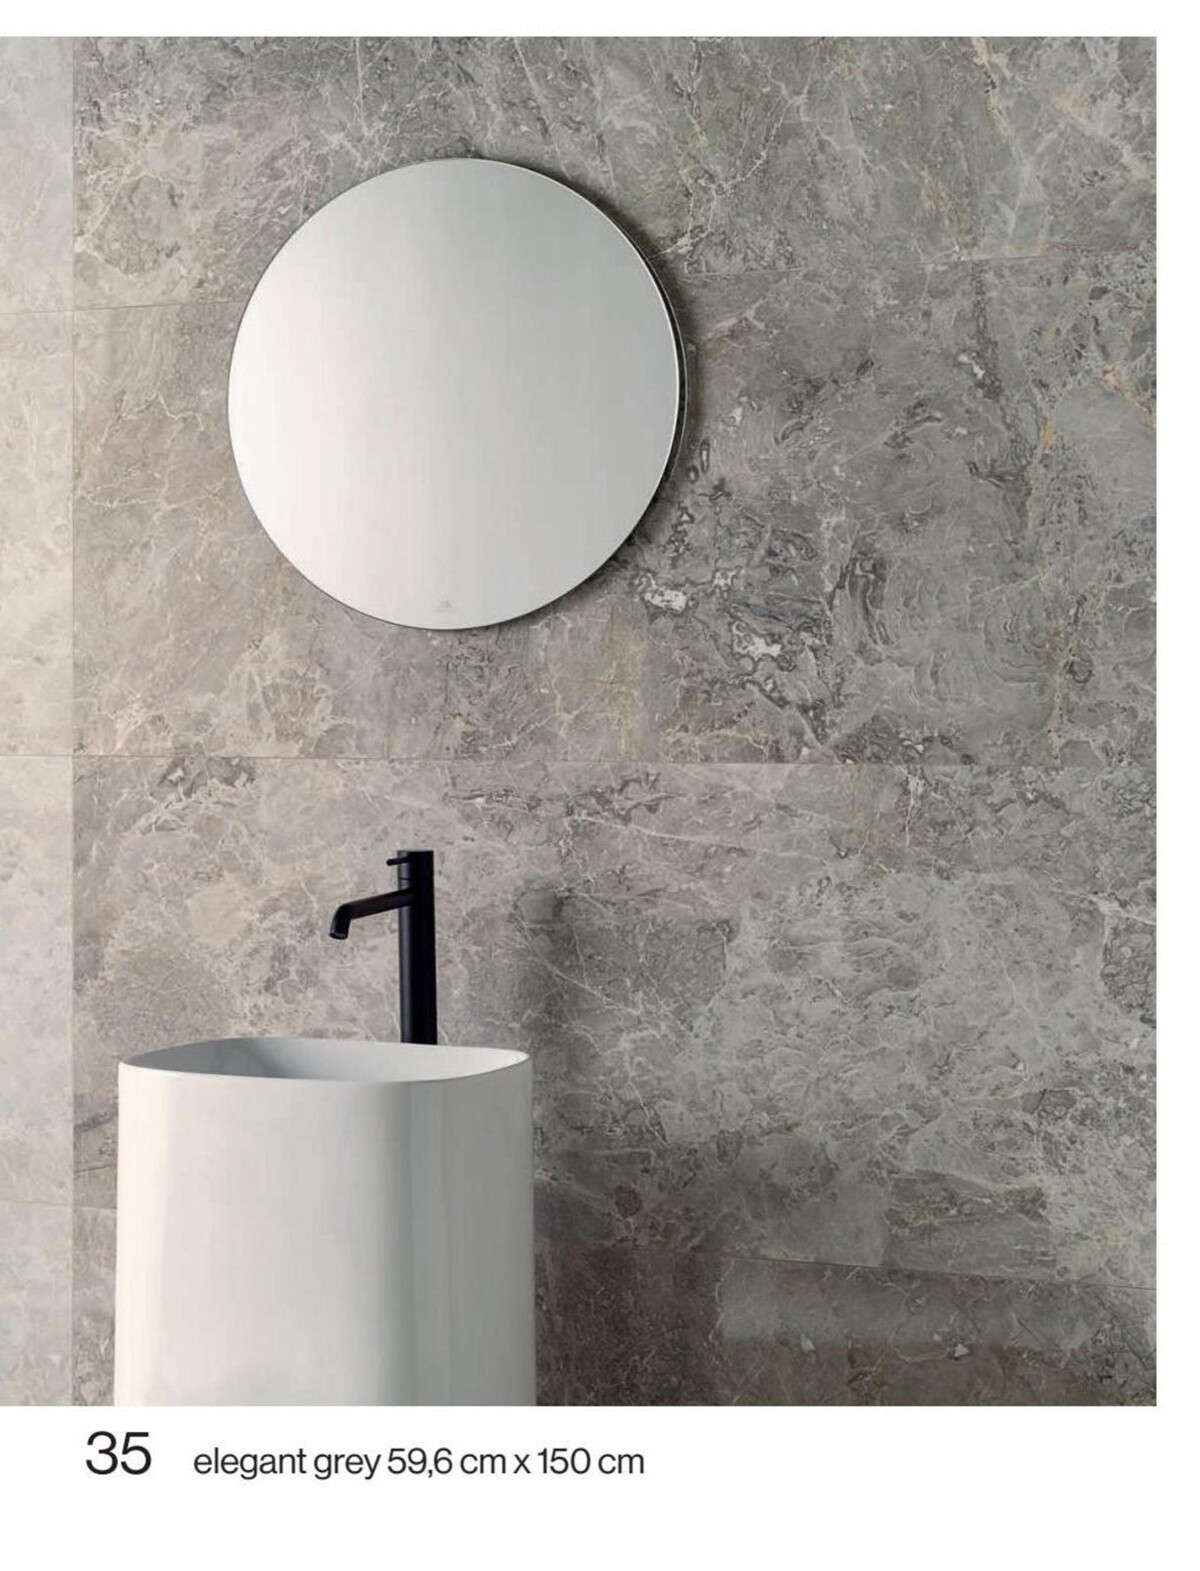 Catalogue MARMI,a ceramic tile that echoes the purity of marble, page 00035